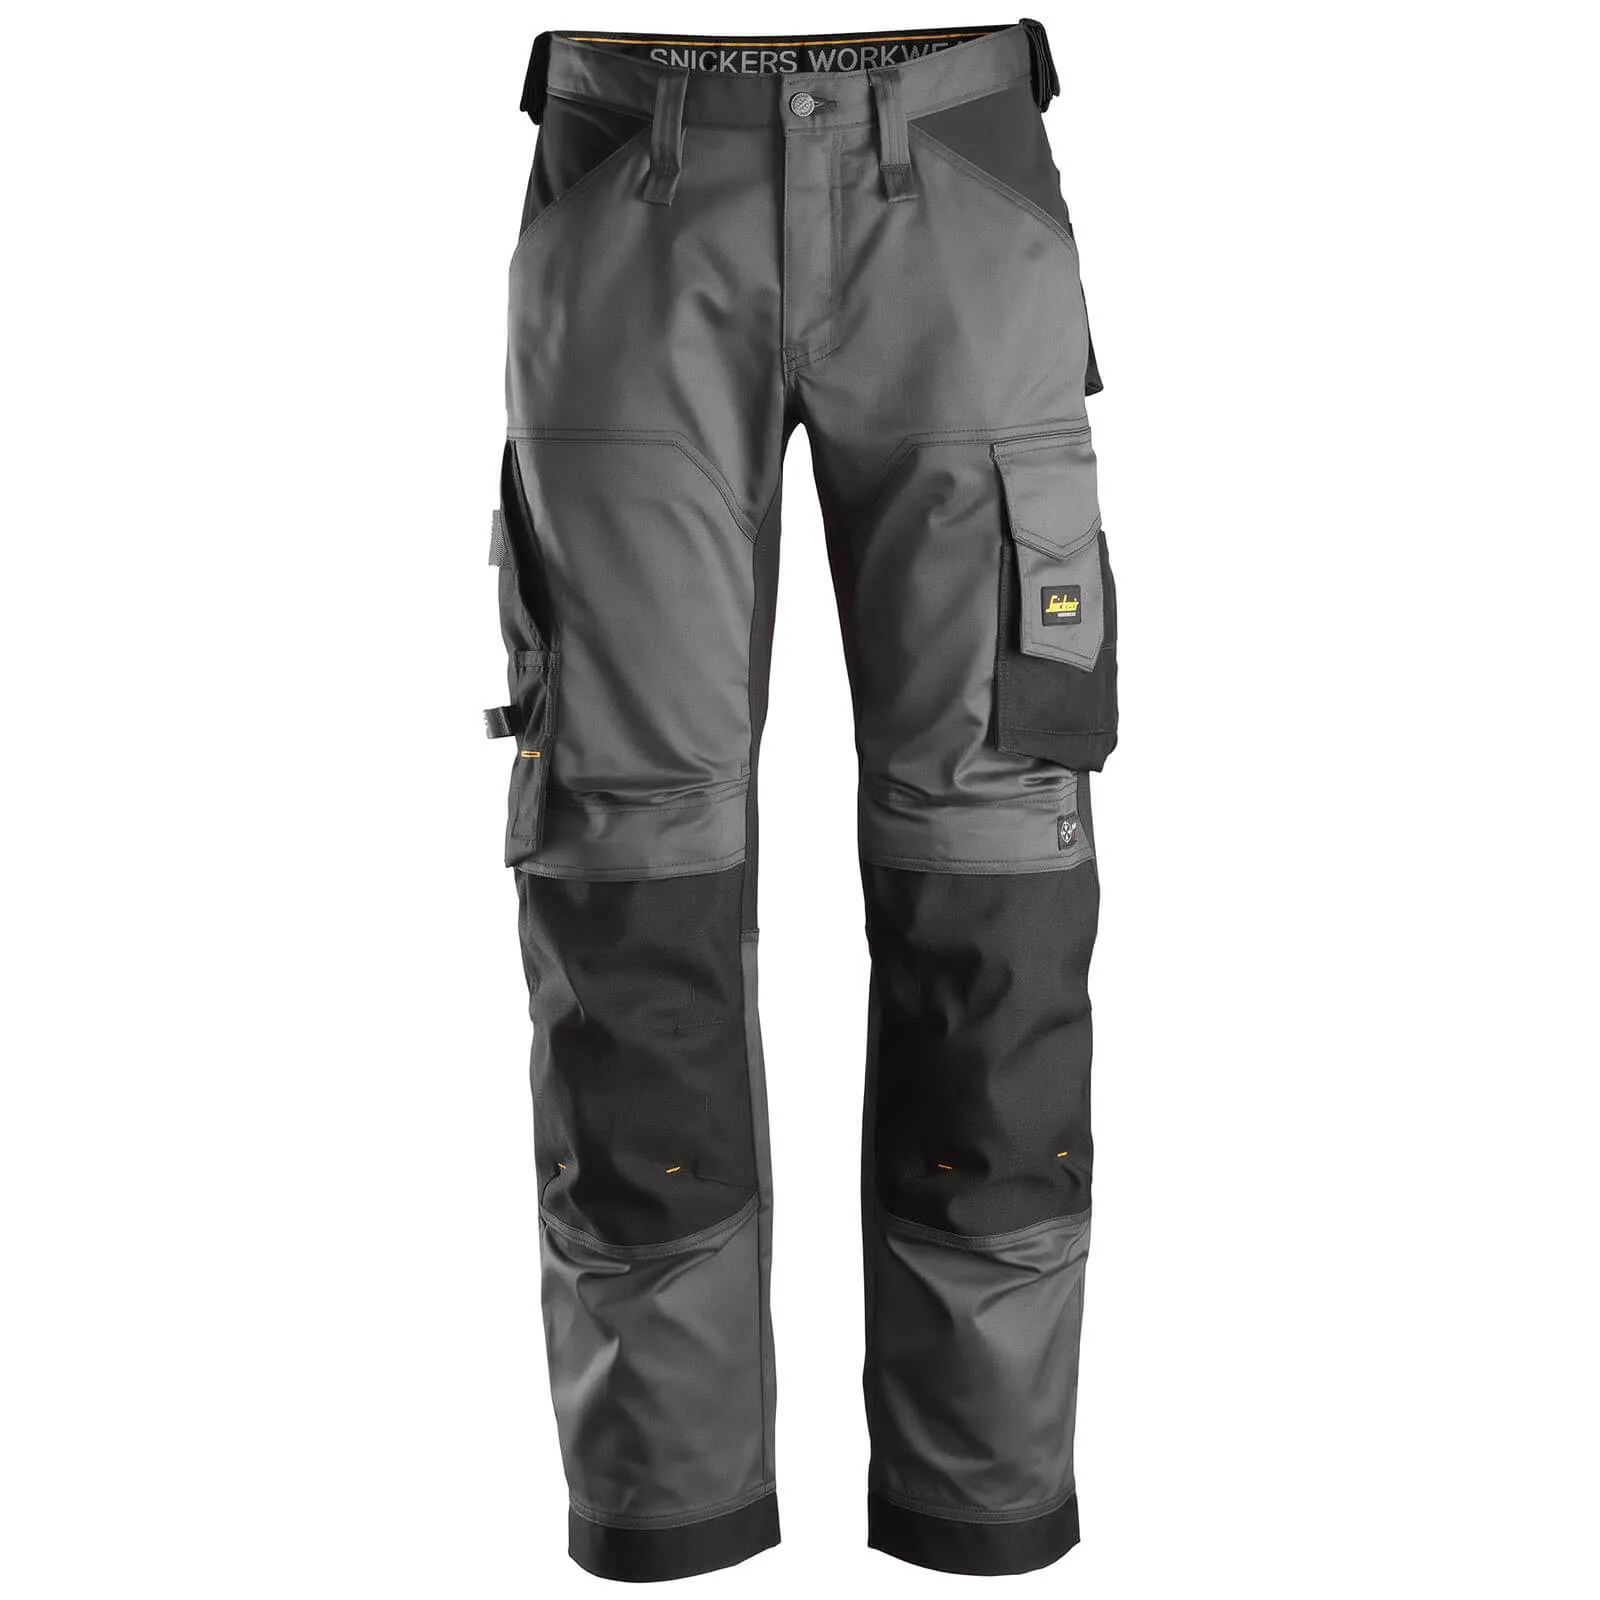 Snickers 6351 Allround Work Stretch Loose Fit Trousers - Steel Grey / Black, 47", 35"